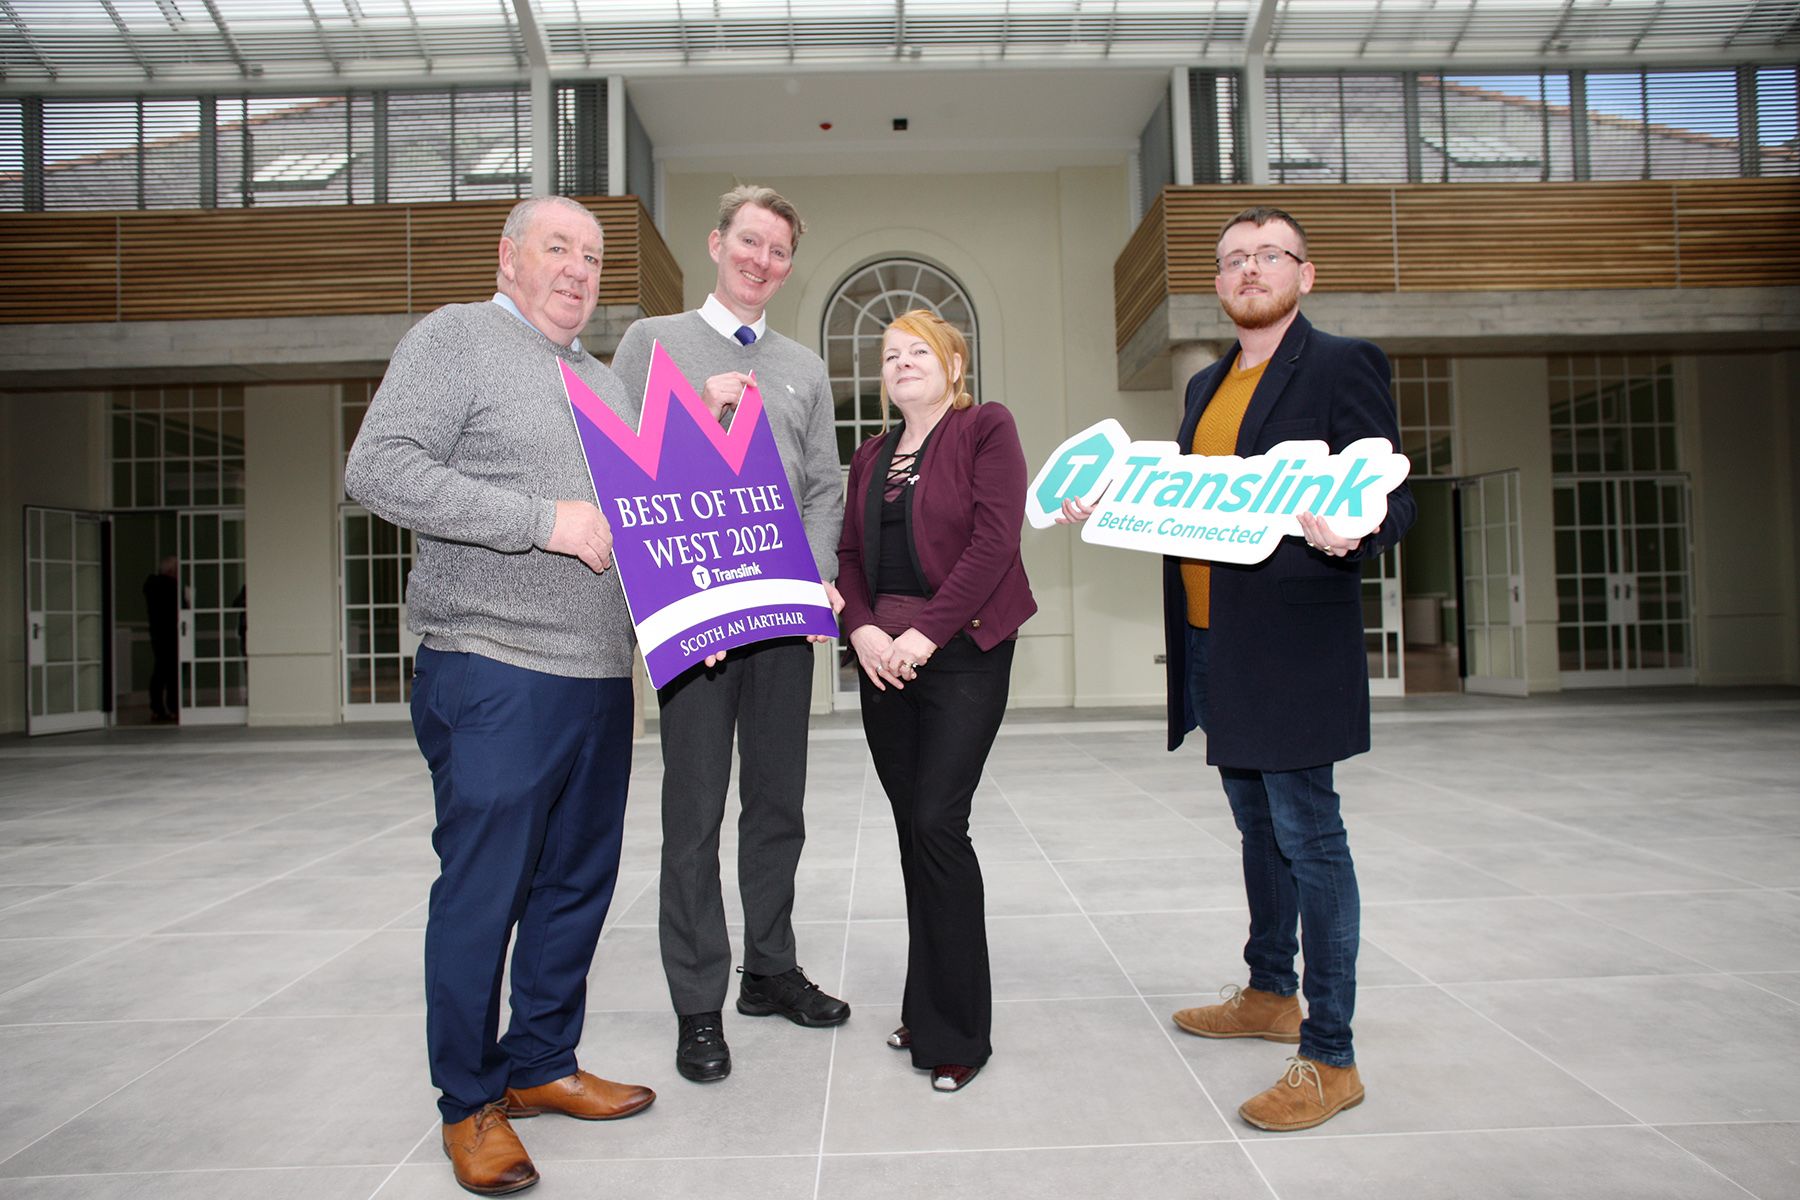 ON BOARD: Gerry McConville, Chairman of the Falls Community Council with Damian Bannon (Translink), Marie Maguire, Deputy Chair of the Falls Community Council andBelfast Media Group\'s James McCarthy 